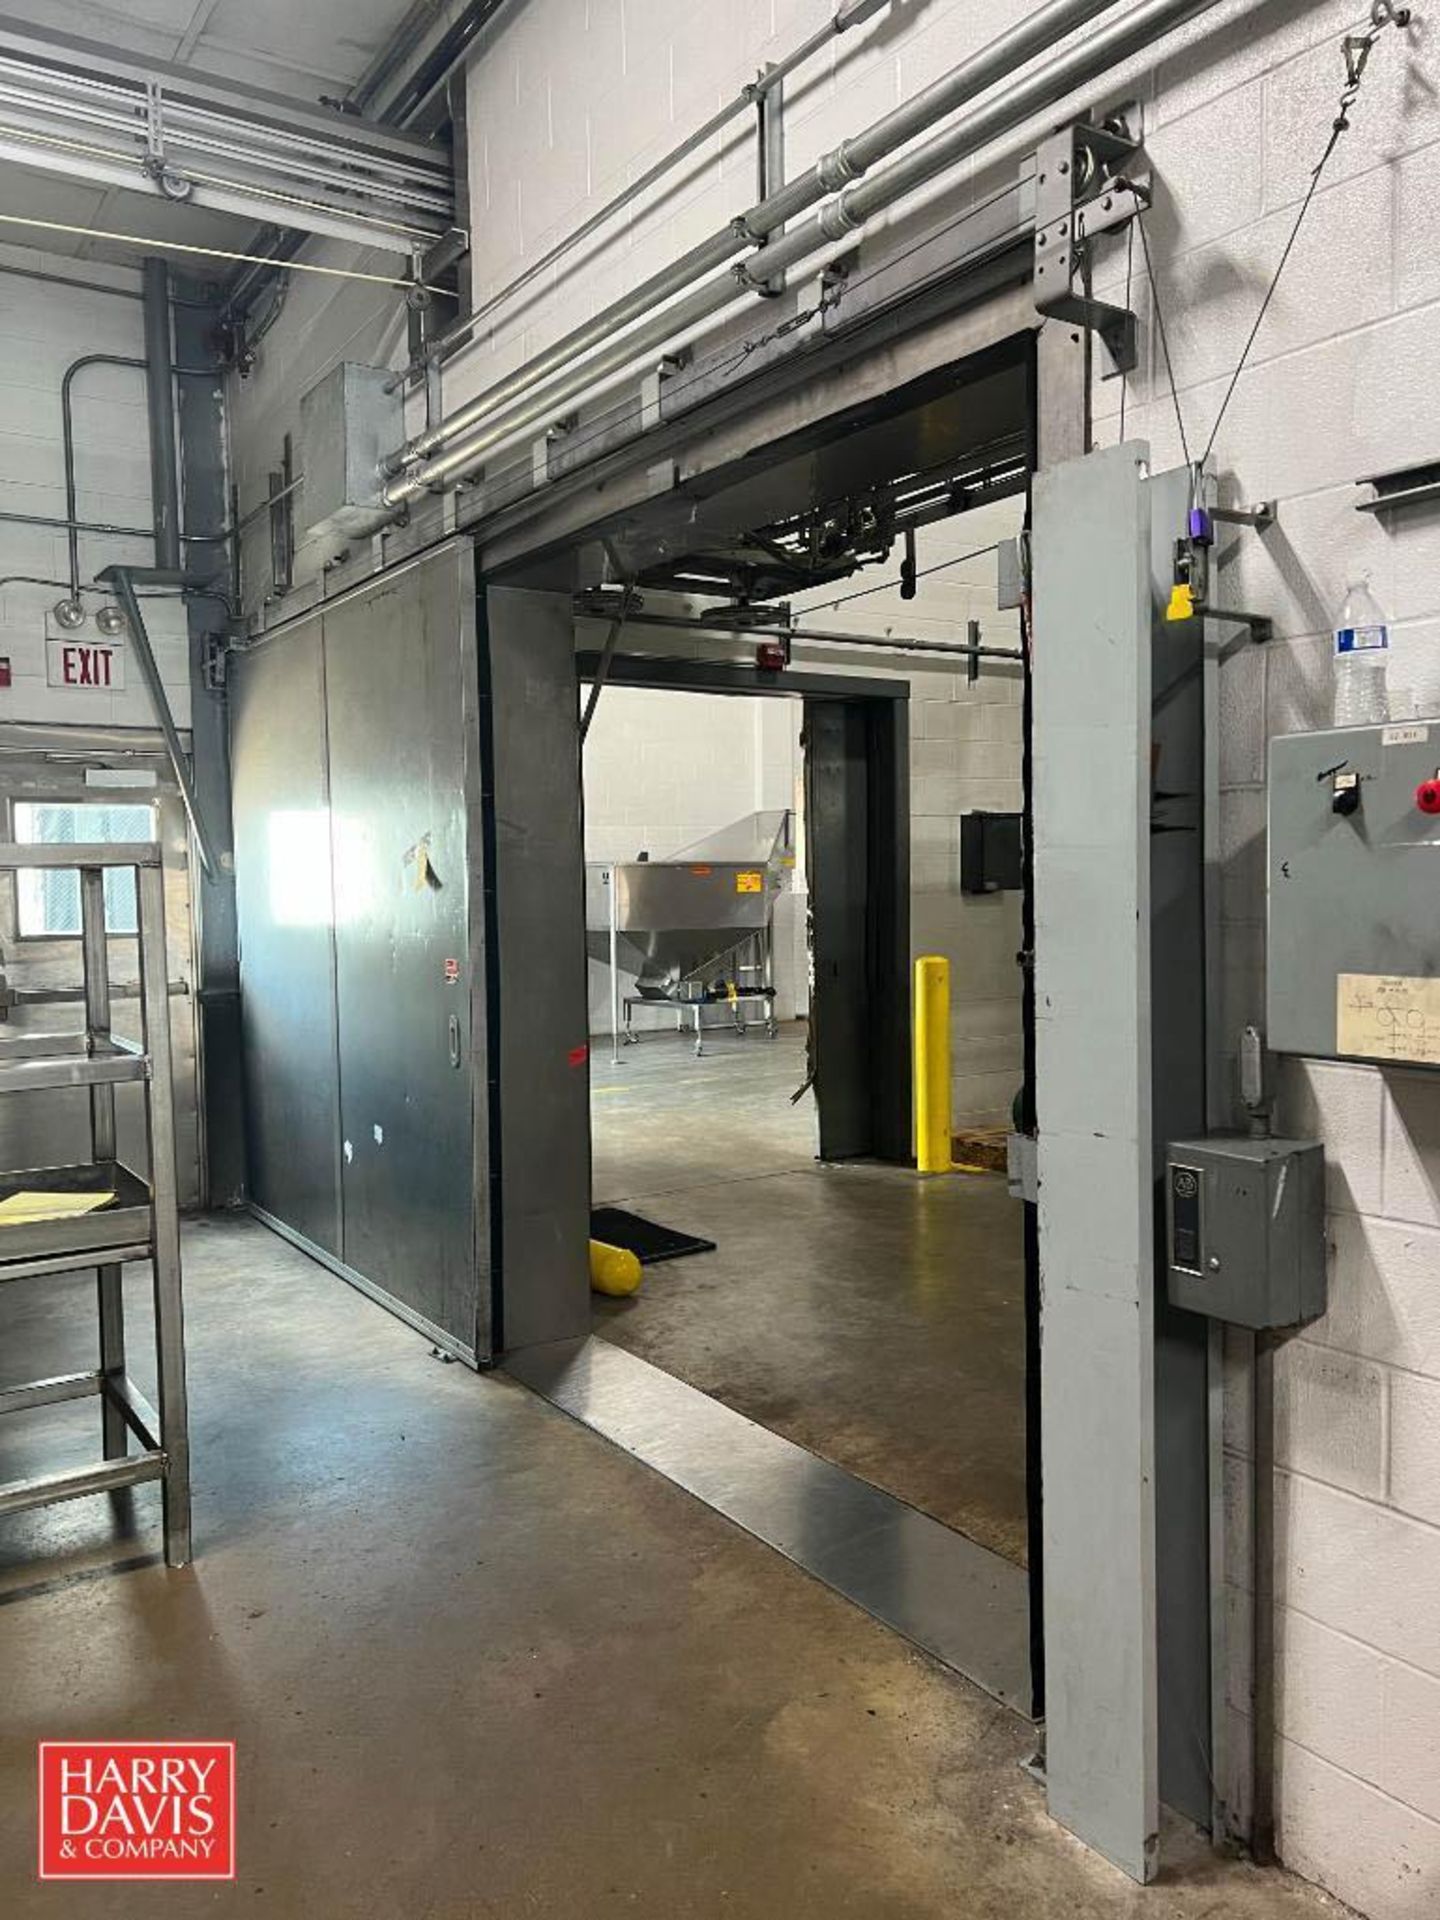 Chase Industries Fire-Safe Sliding Door, Dimensions = 104" Width x 100" Height - Rigging Fee: $850